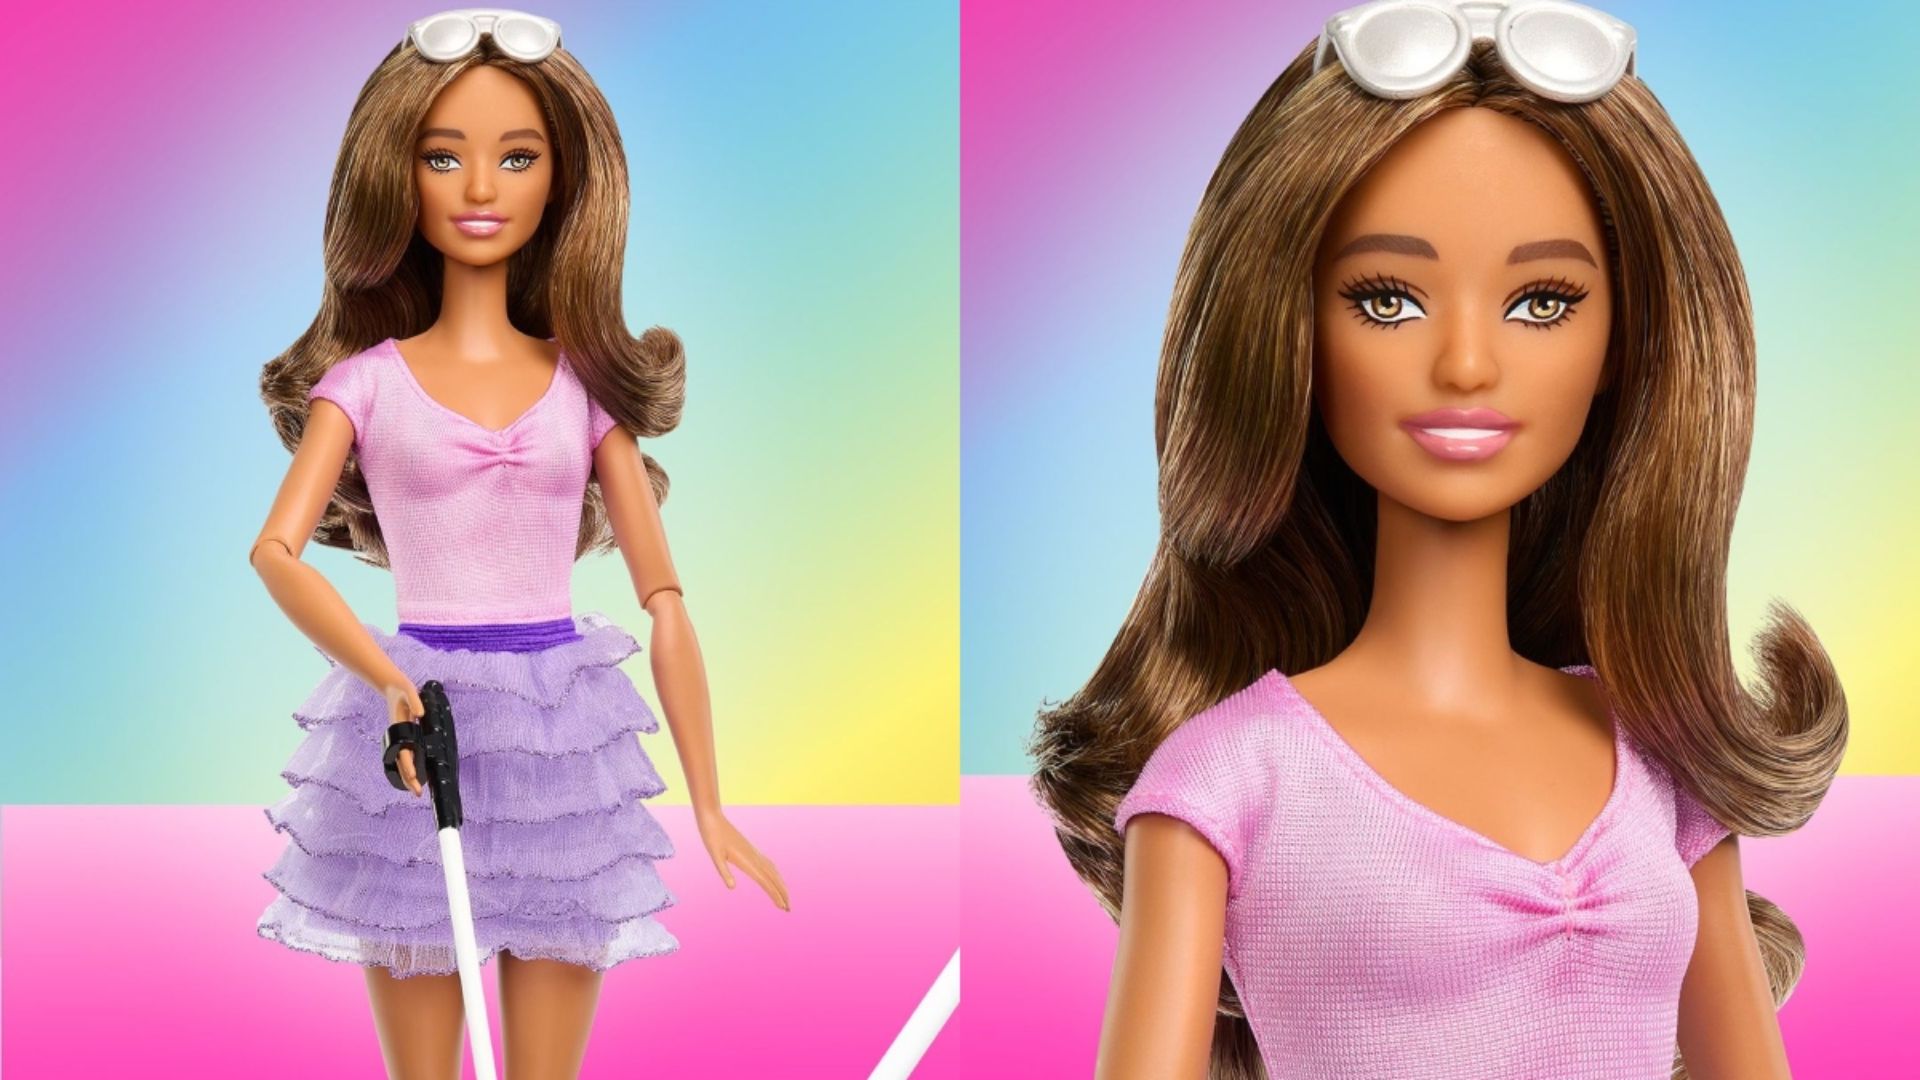 Barbie For Visually Impaired With Cane And Braille Packaging Introduced